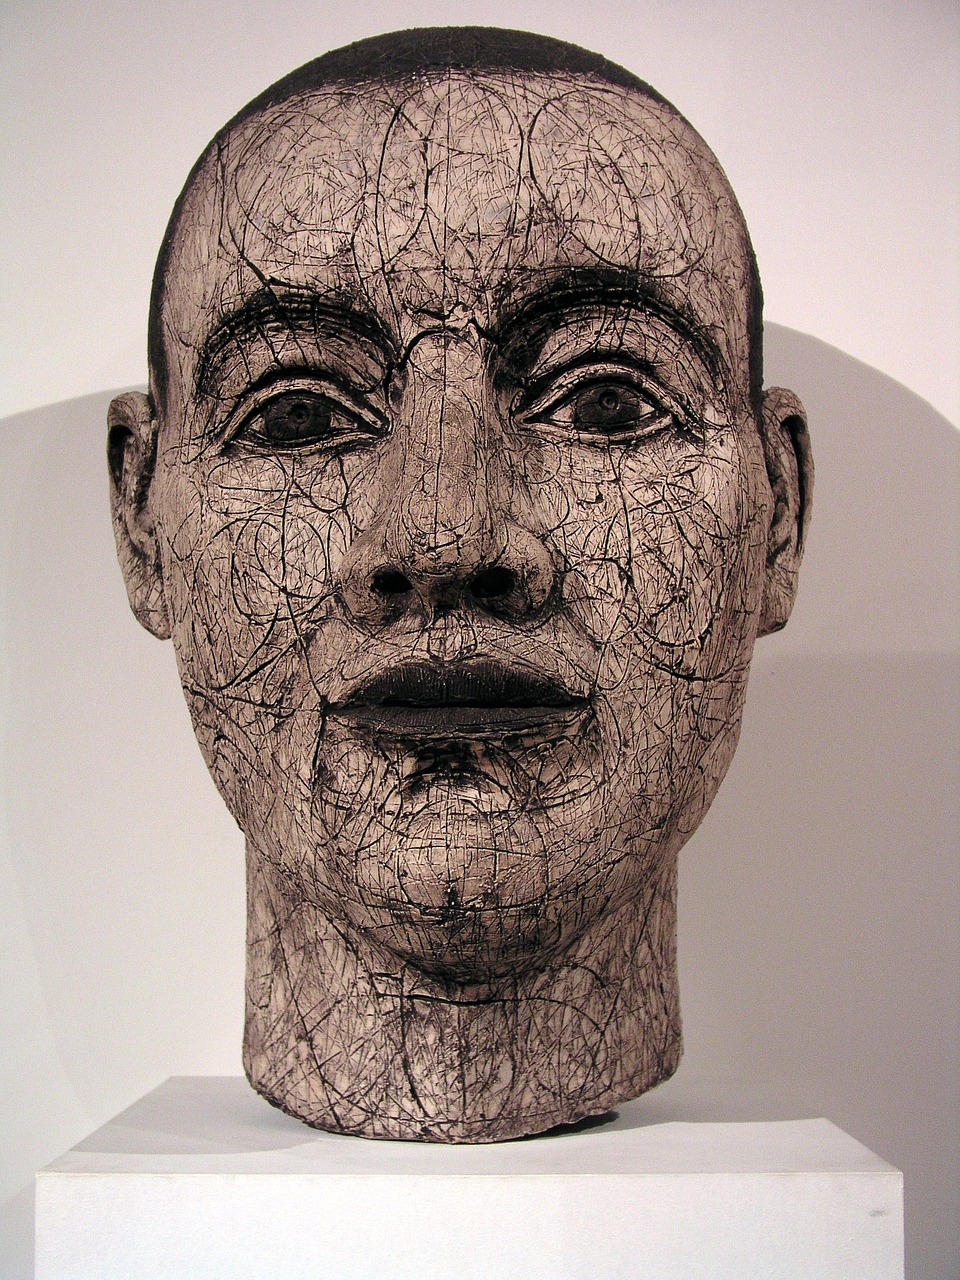 Image - head sculpture face clay